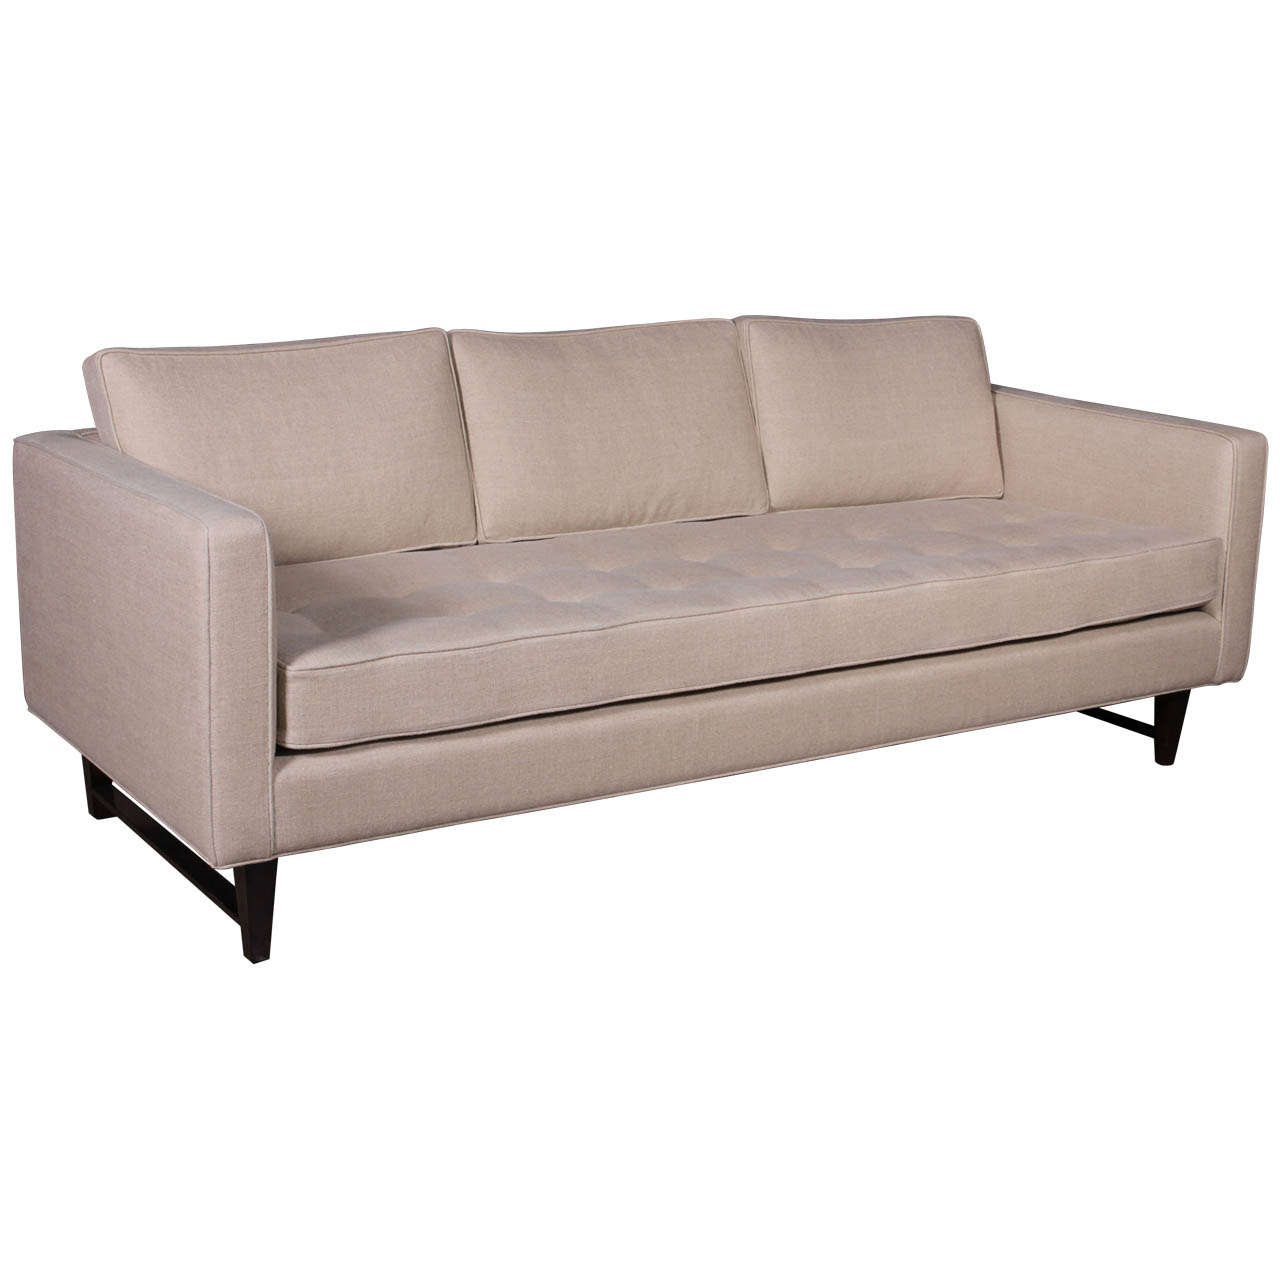 3 seat sofa with walnut frame and button tufted seat